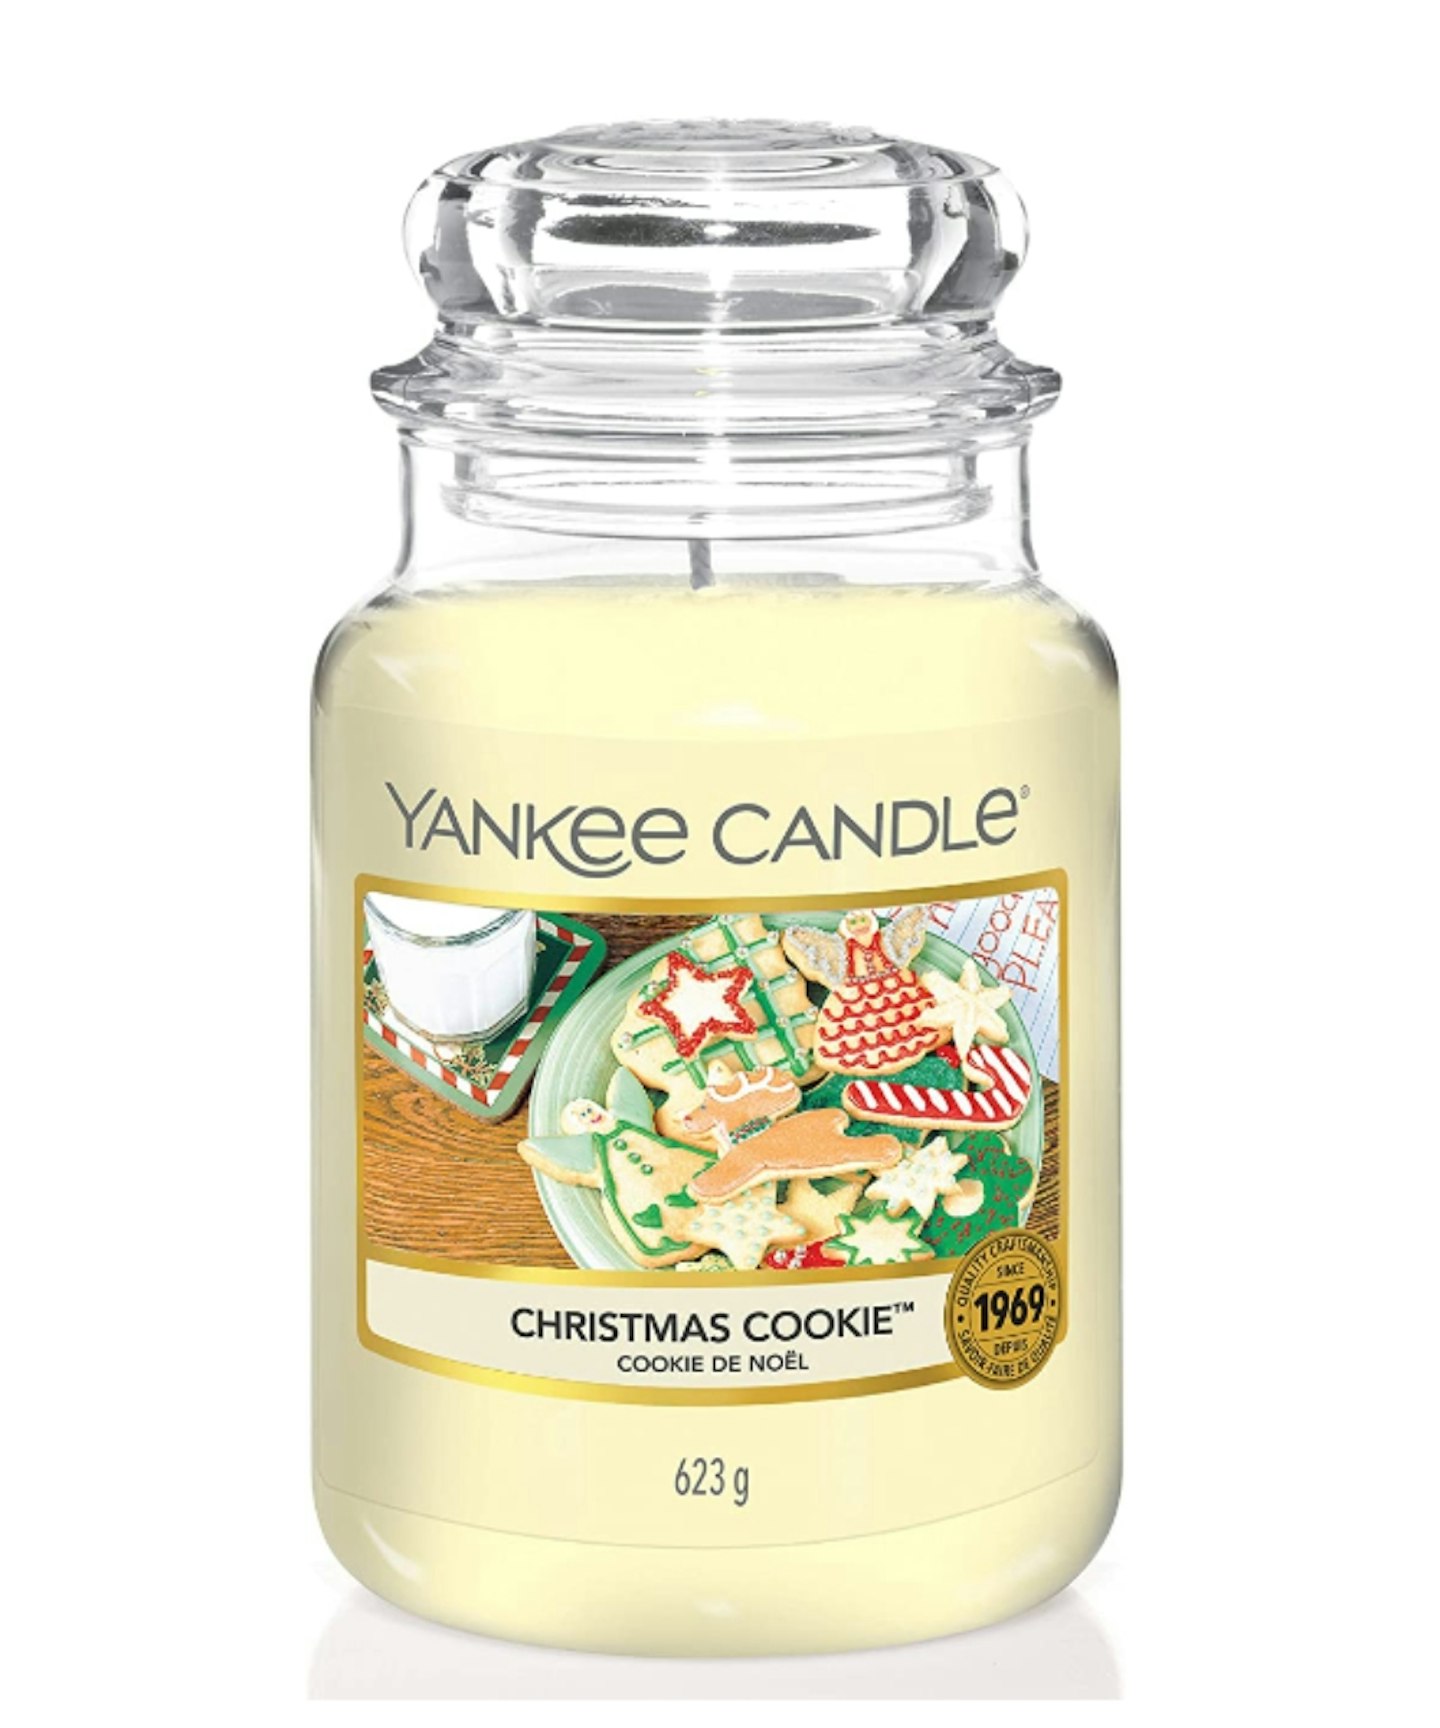 Bougie Yankee Candle Grande Jarre - Clean Cotton